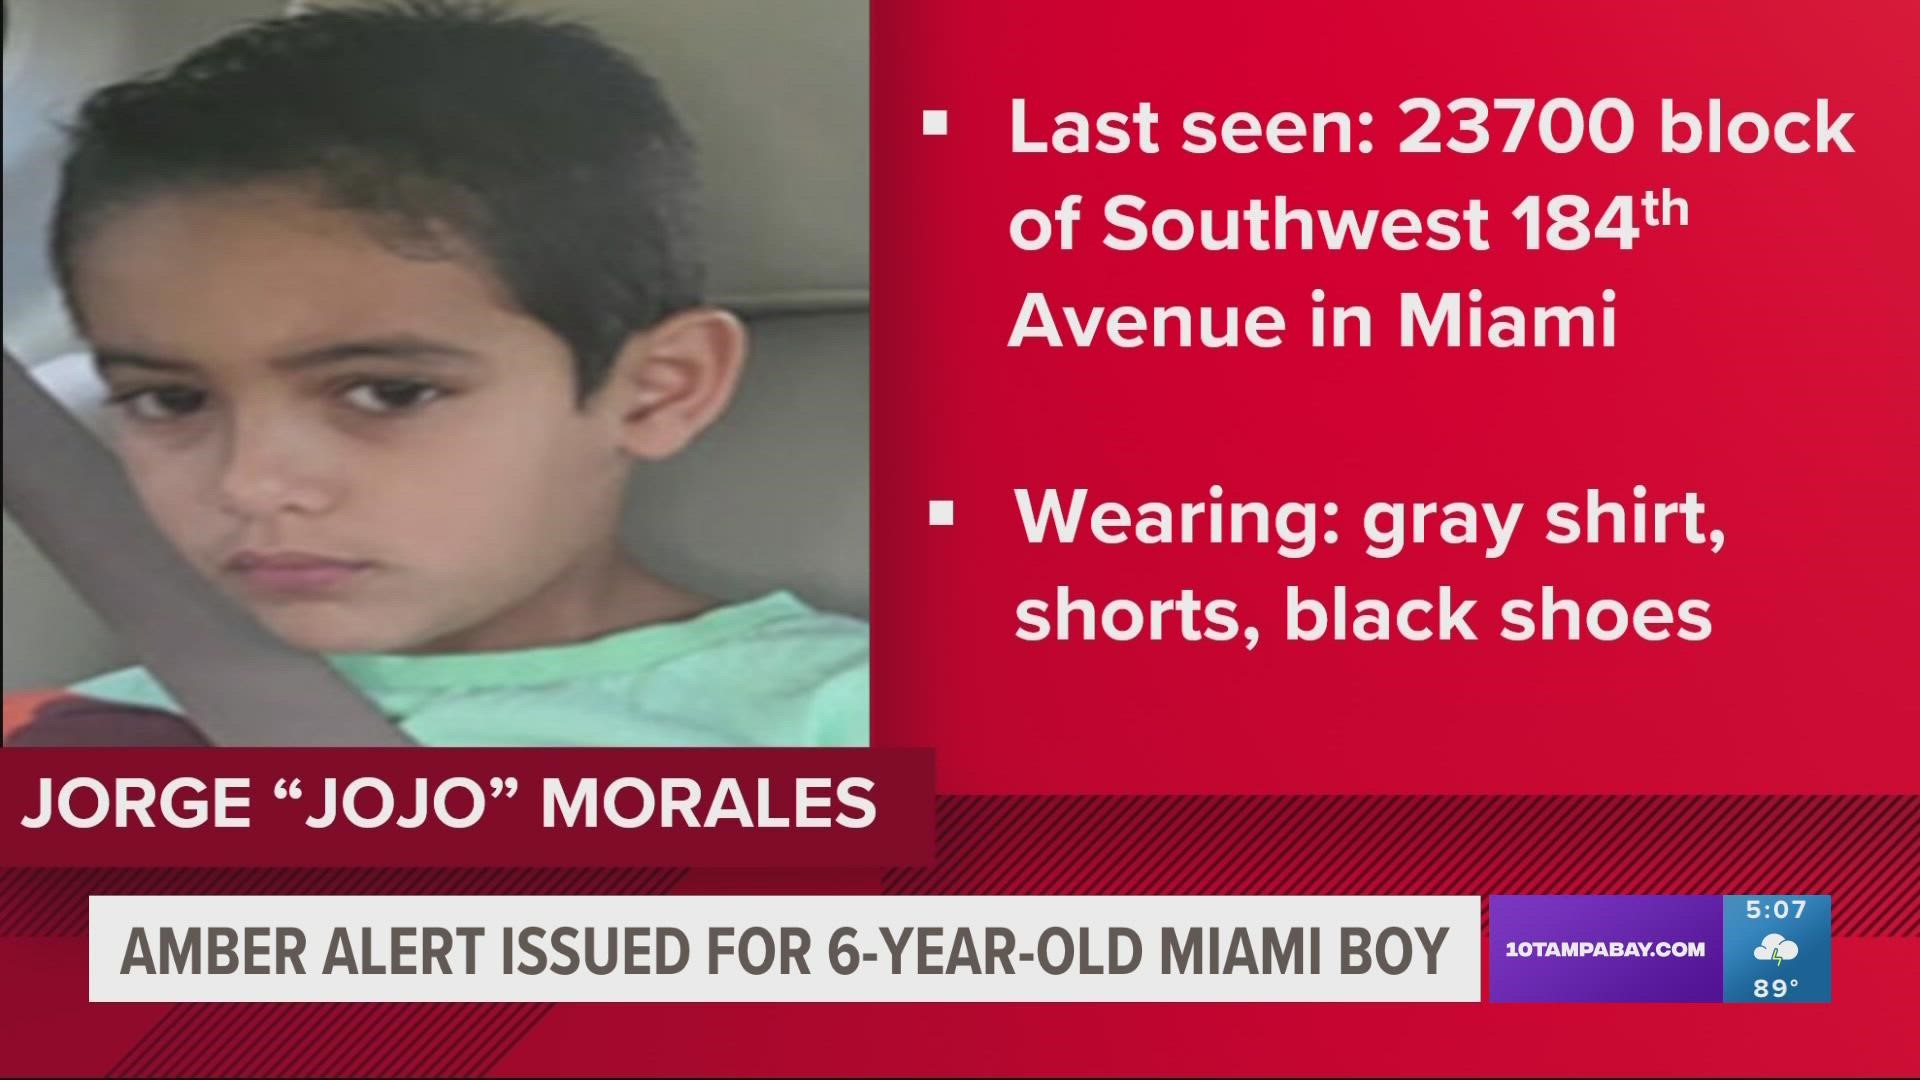 The FDLE issued a missing child alert for the South Florida boy earlier this week. The 6-year-old could be in the company of a 45-year-old man named Jorge Morales.